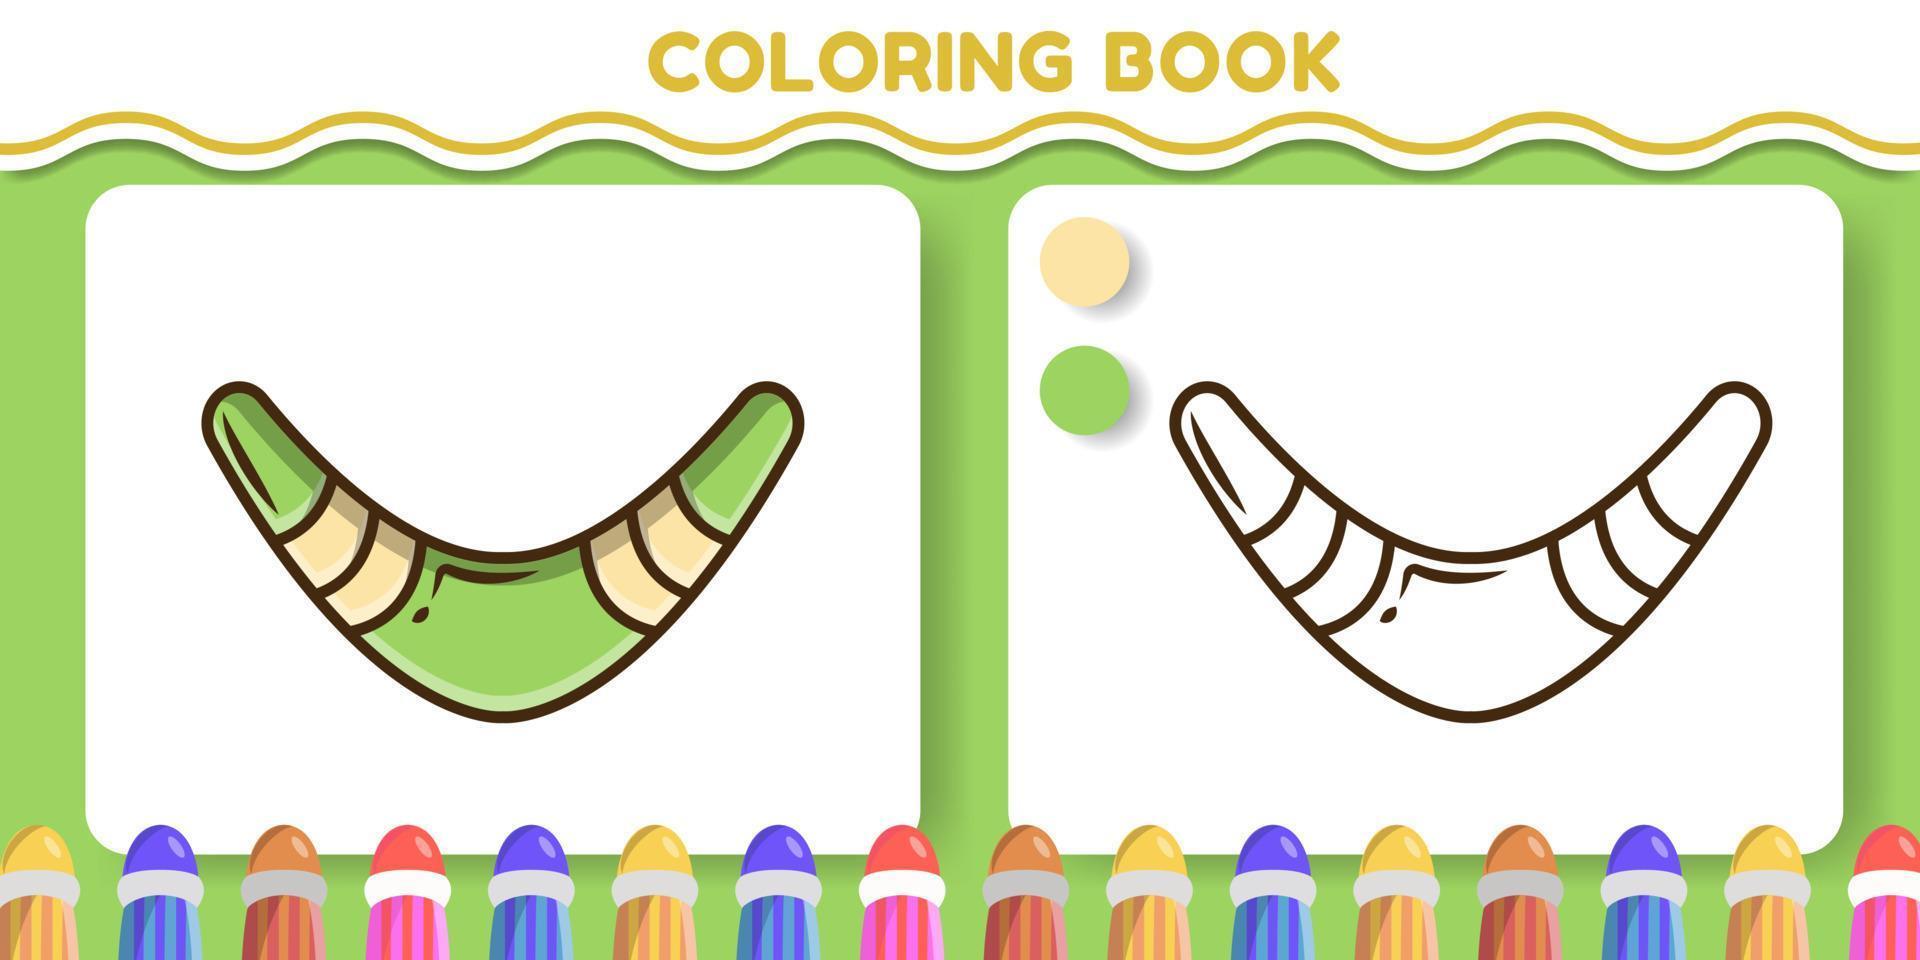 Colorful and black and white boomerang hand drawn cartoon doodle coloring book for kids vector